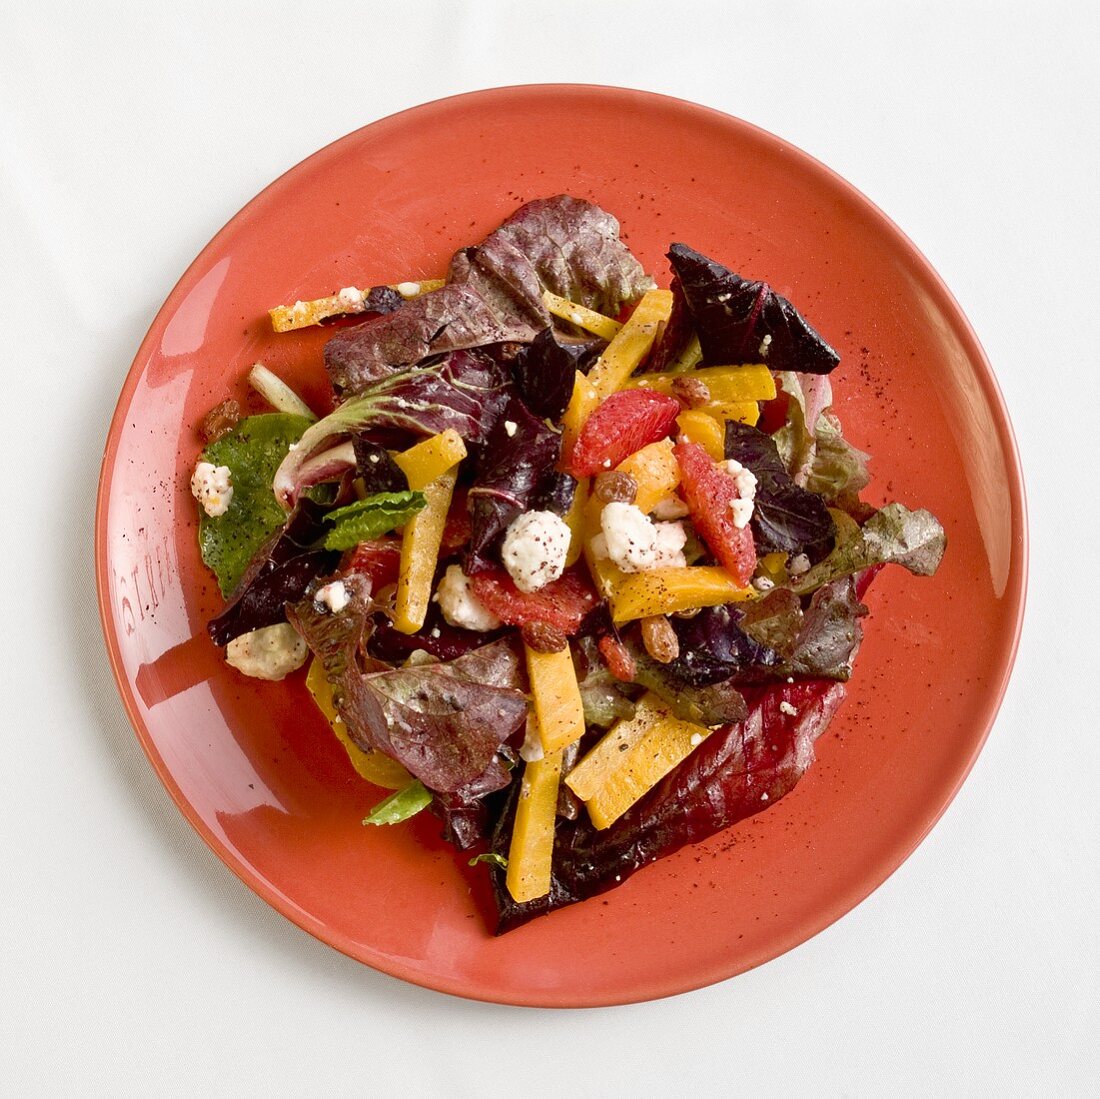 Radicchio Salad with Golden Beets, Blood Orange and Goat Cheese